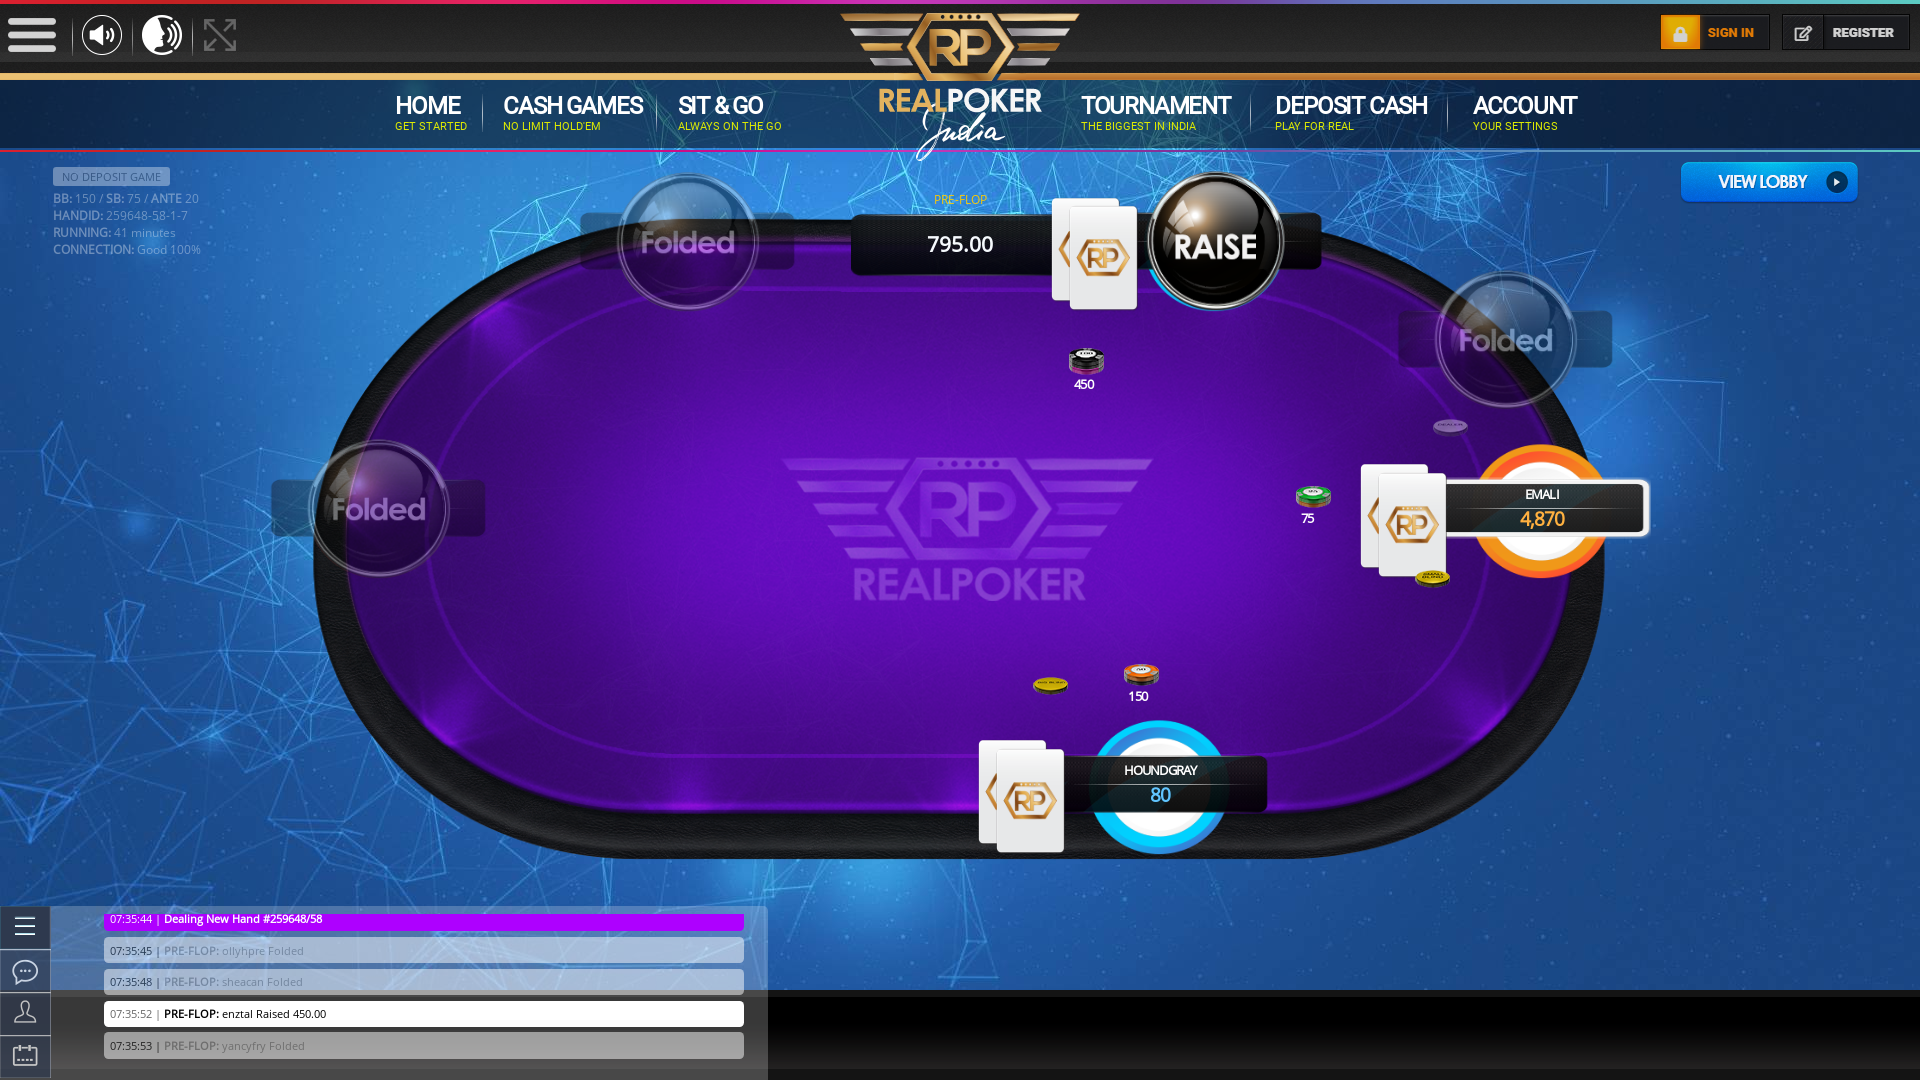 Real poker 10 player table in the 4 match